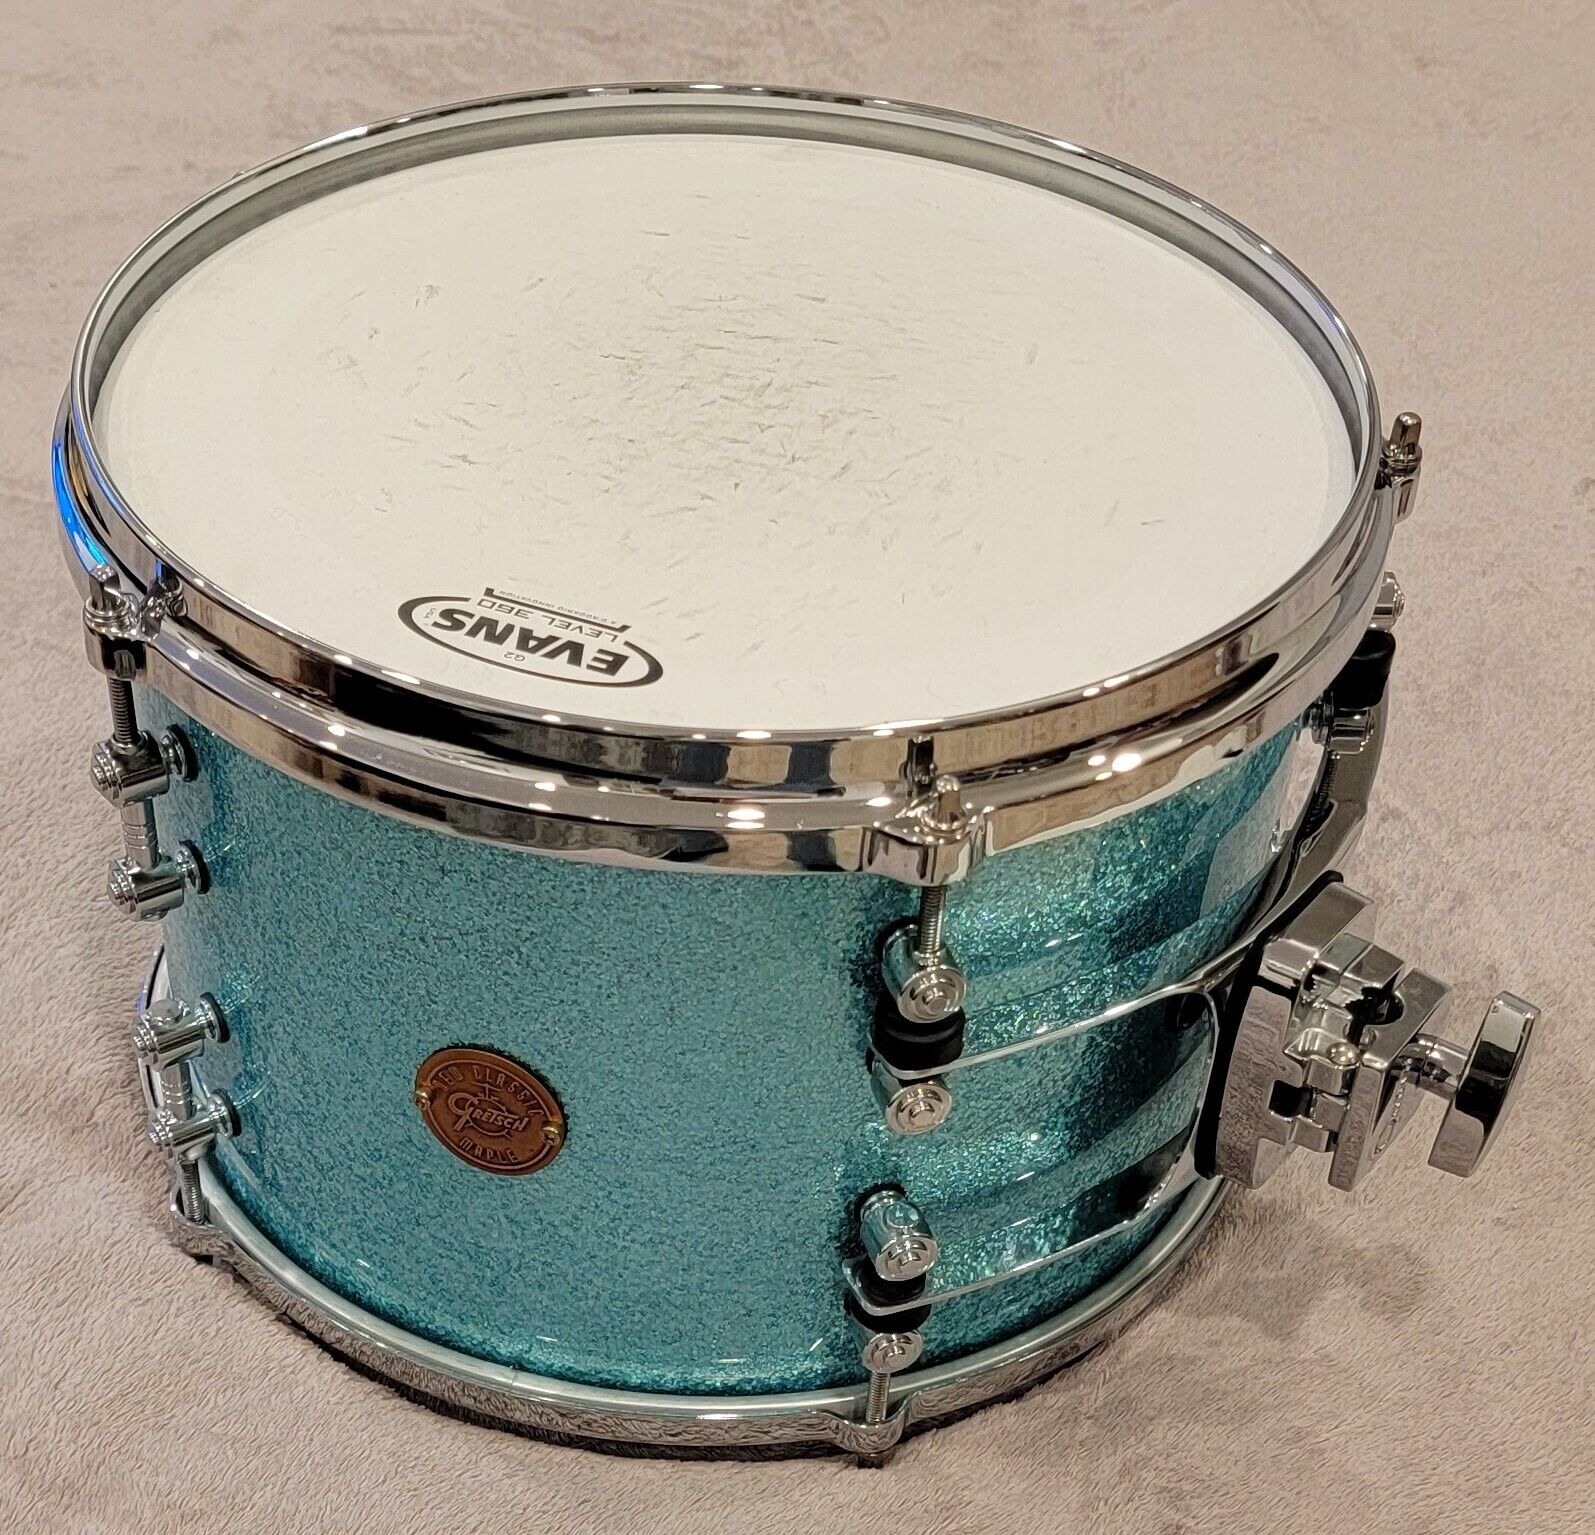 Gretsch New Classic Maple 2012 Limited Reserve 4pc Shell Pack Turquoise Sparkle! 3